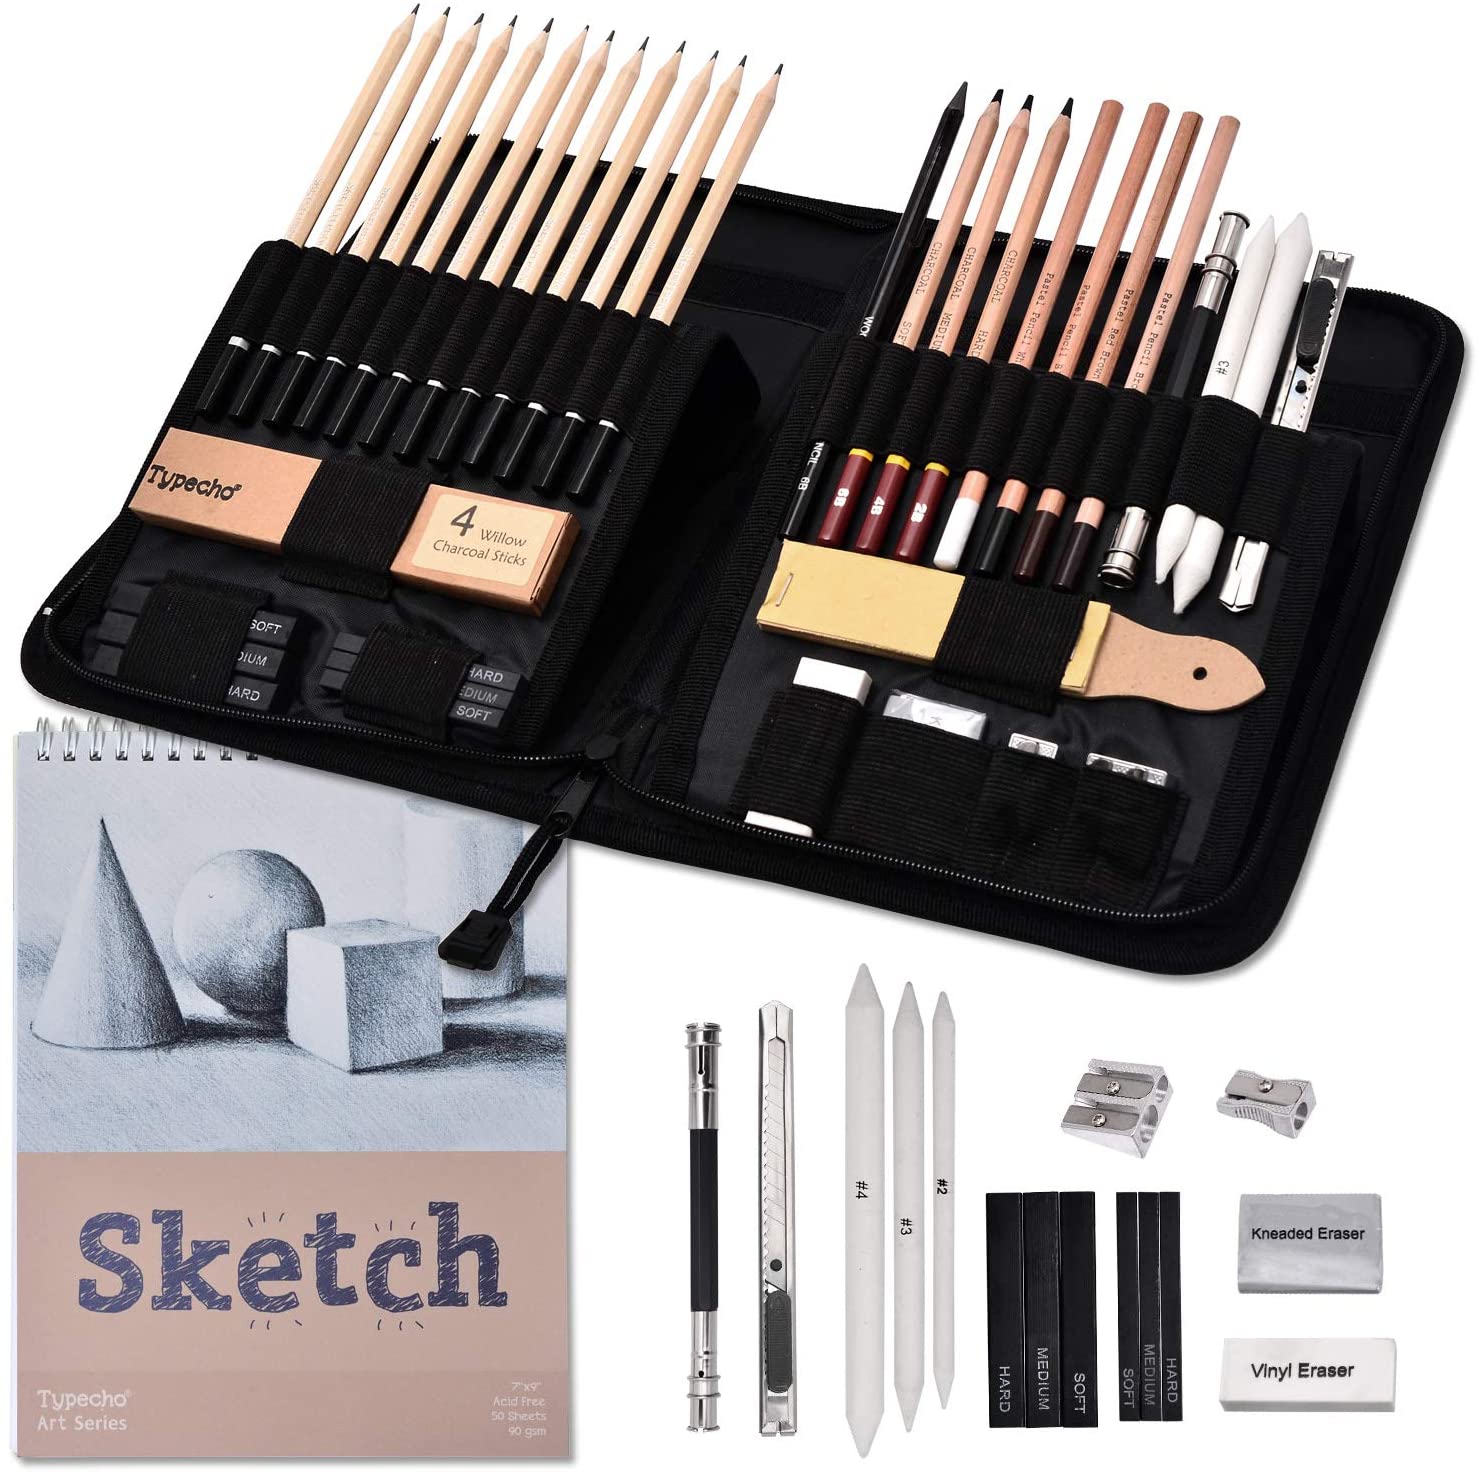 Sketching Set 41 PCS Drawing and Sketching Artist Kit Includes Complete  Sketching and Charcoal Pencils with Portable Travel Zippered Case. Art Set  for Kids, Teens and Adults – Typecho Art